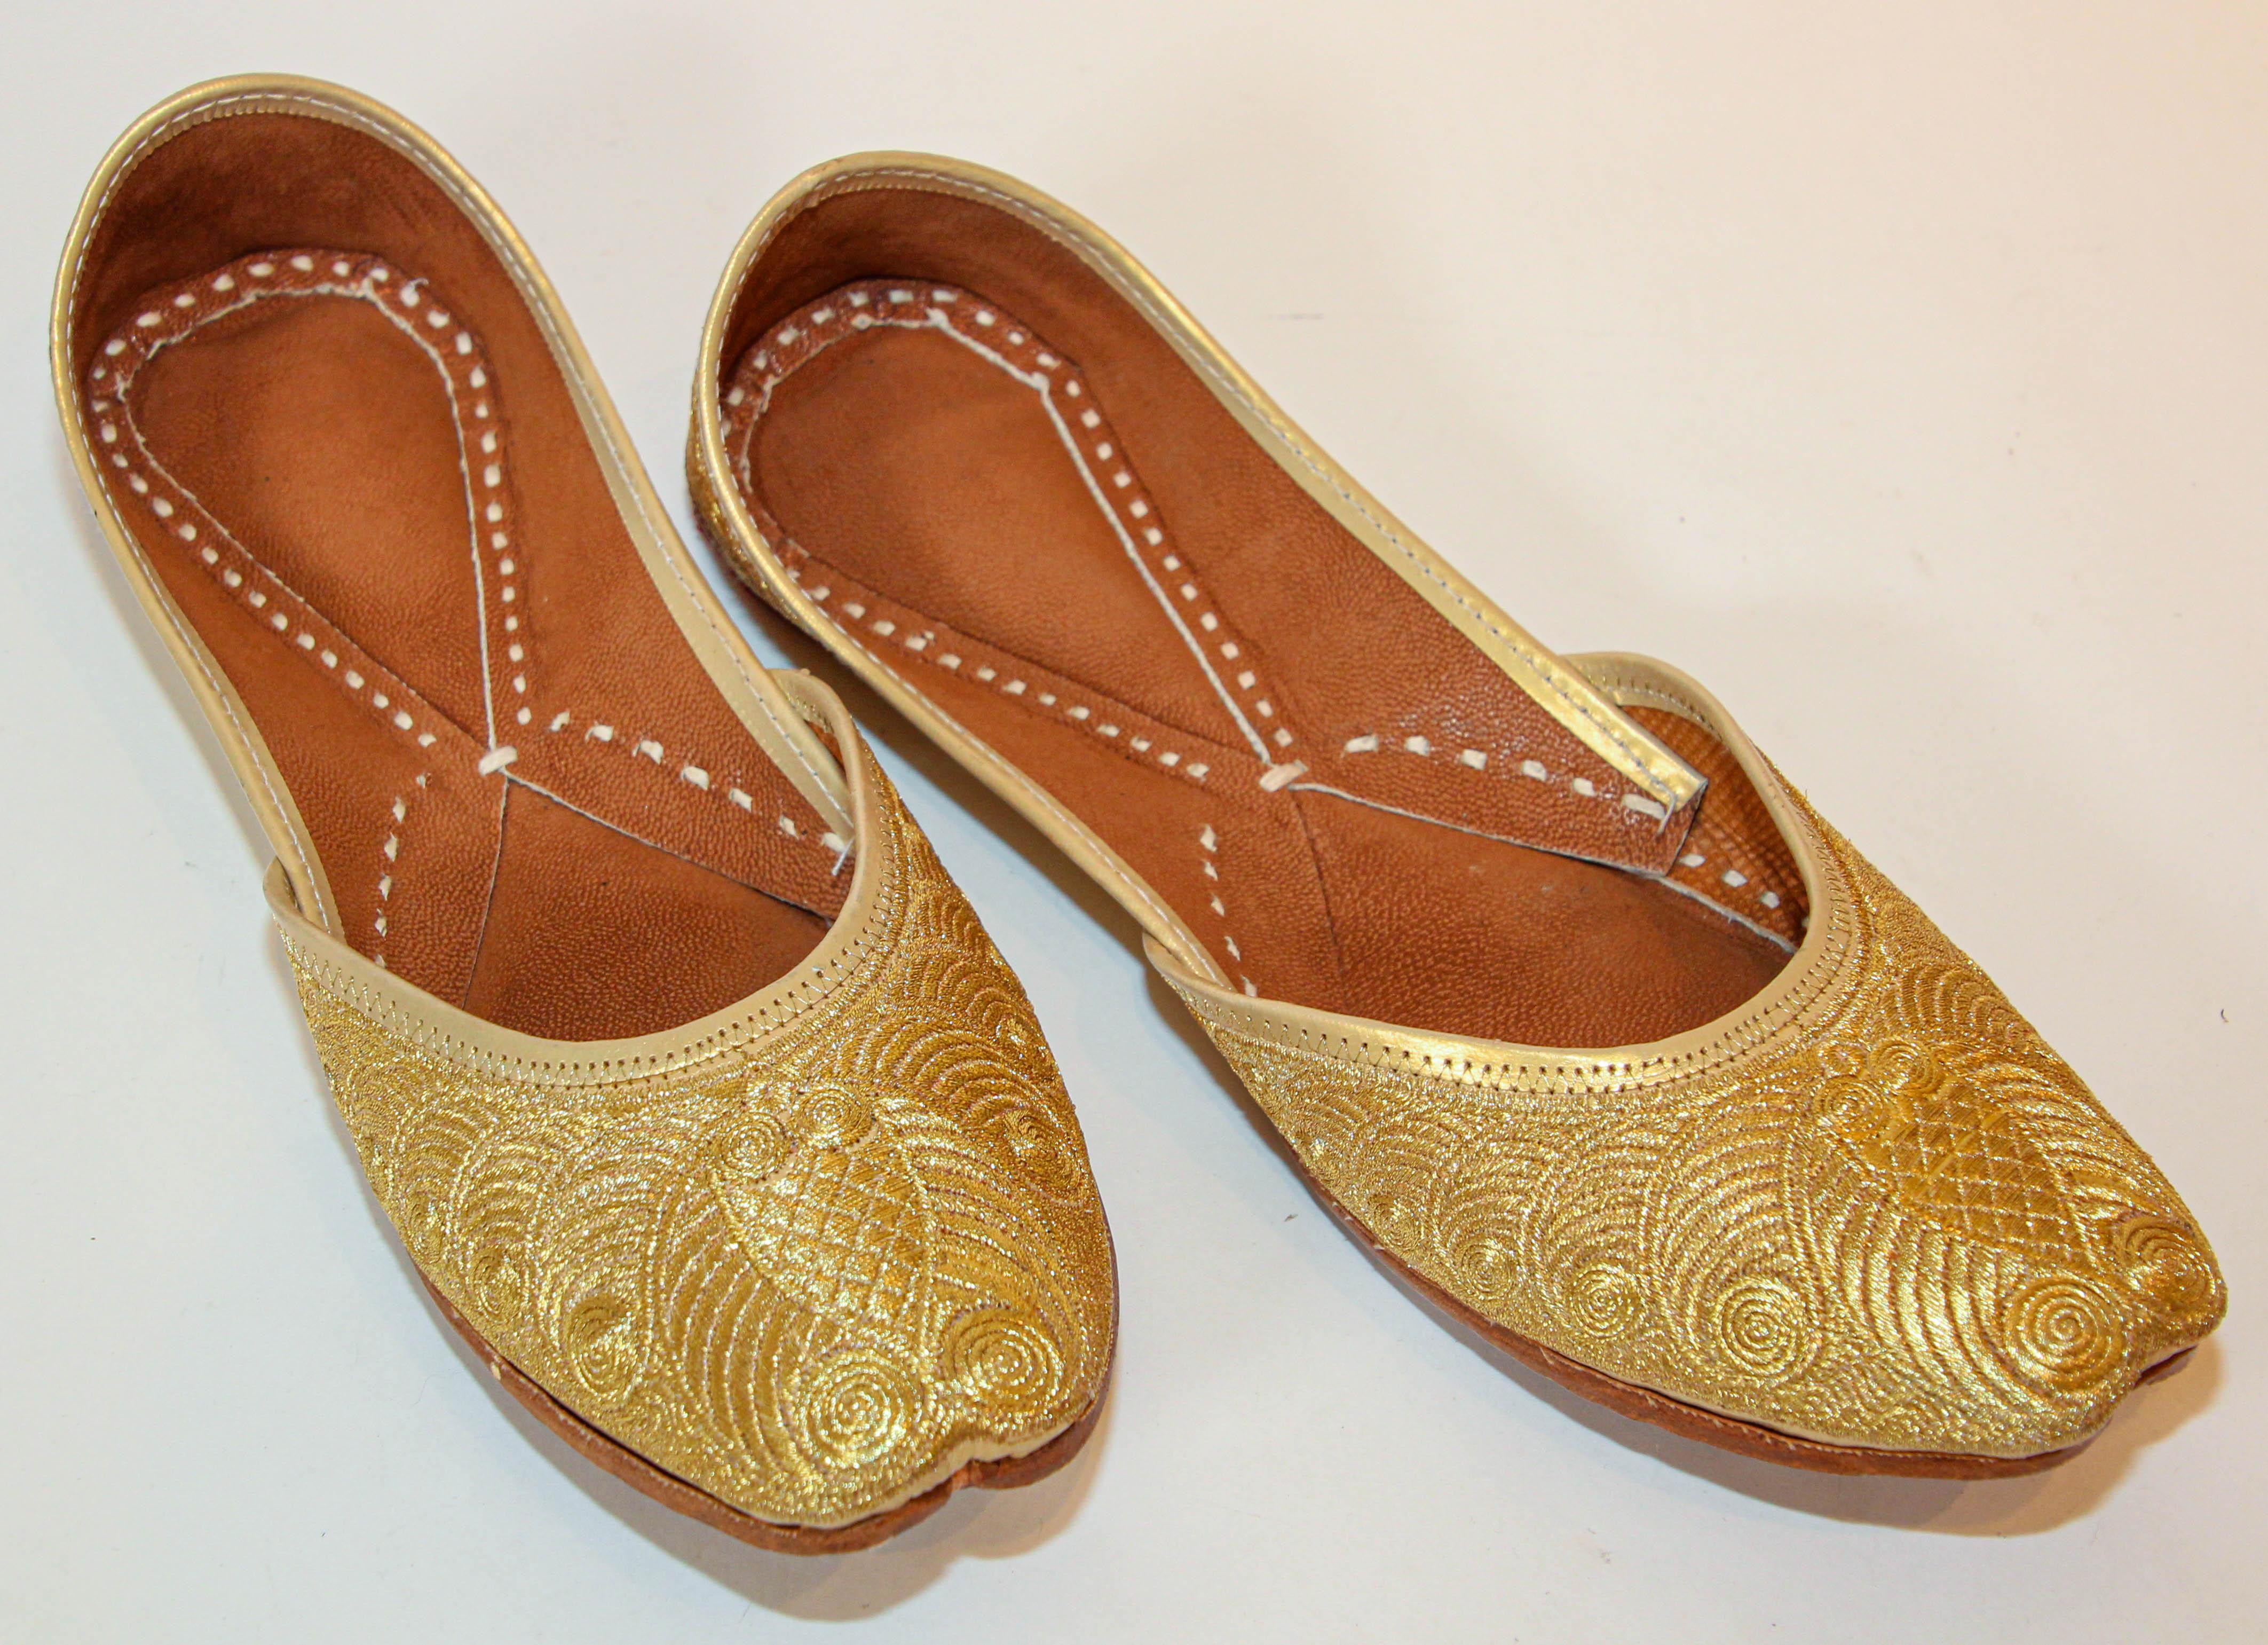 
Vintage 1970s men’s gold leather Indian Punjabi jutti wedding shoes.
Vintage hand stitched and hand tooled leather shoes with hand embroidered with gilt metallic threads.
Amazing Mughal style gold embroidered traditional Islamic Indian leather